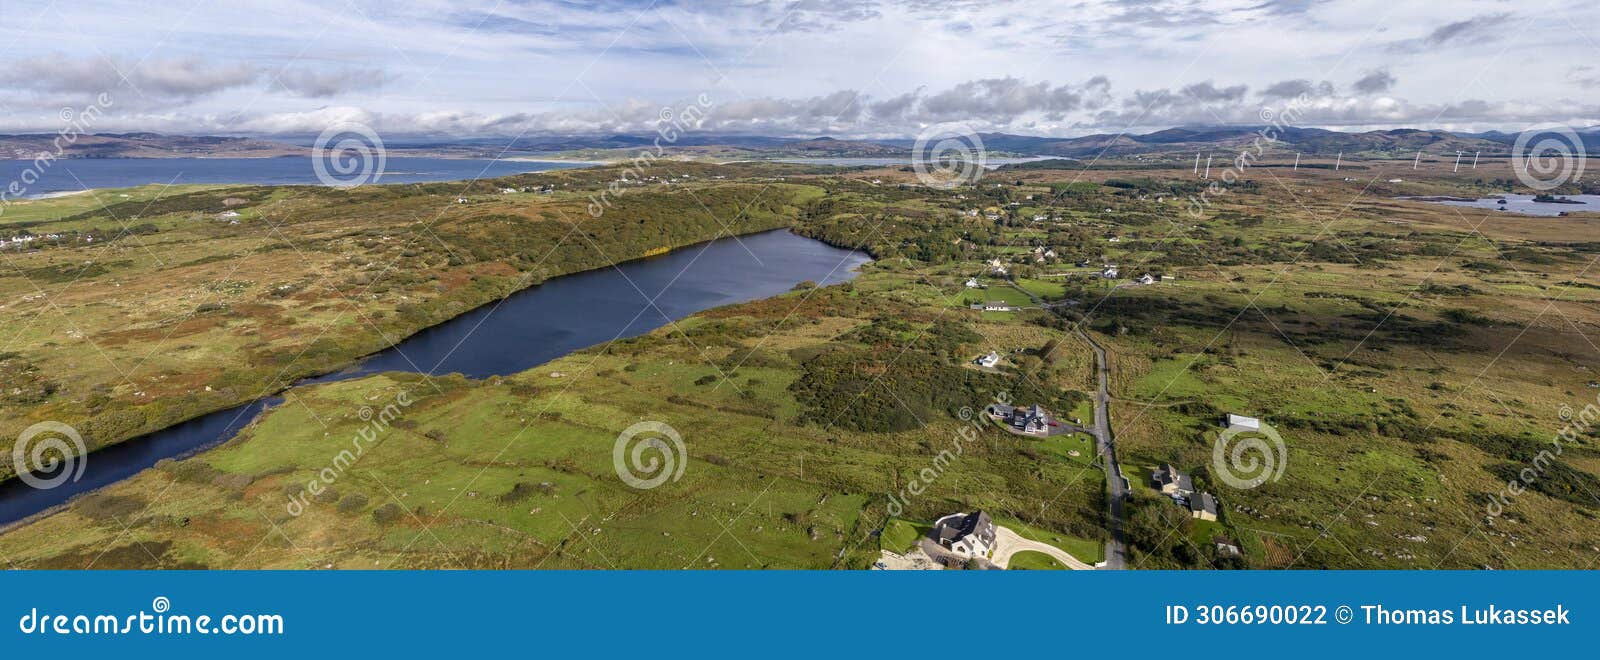 aerial view of lough fad in the morning fog, county donegal, republic of ireland